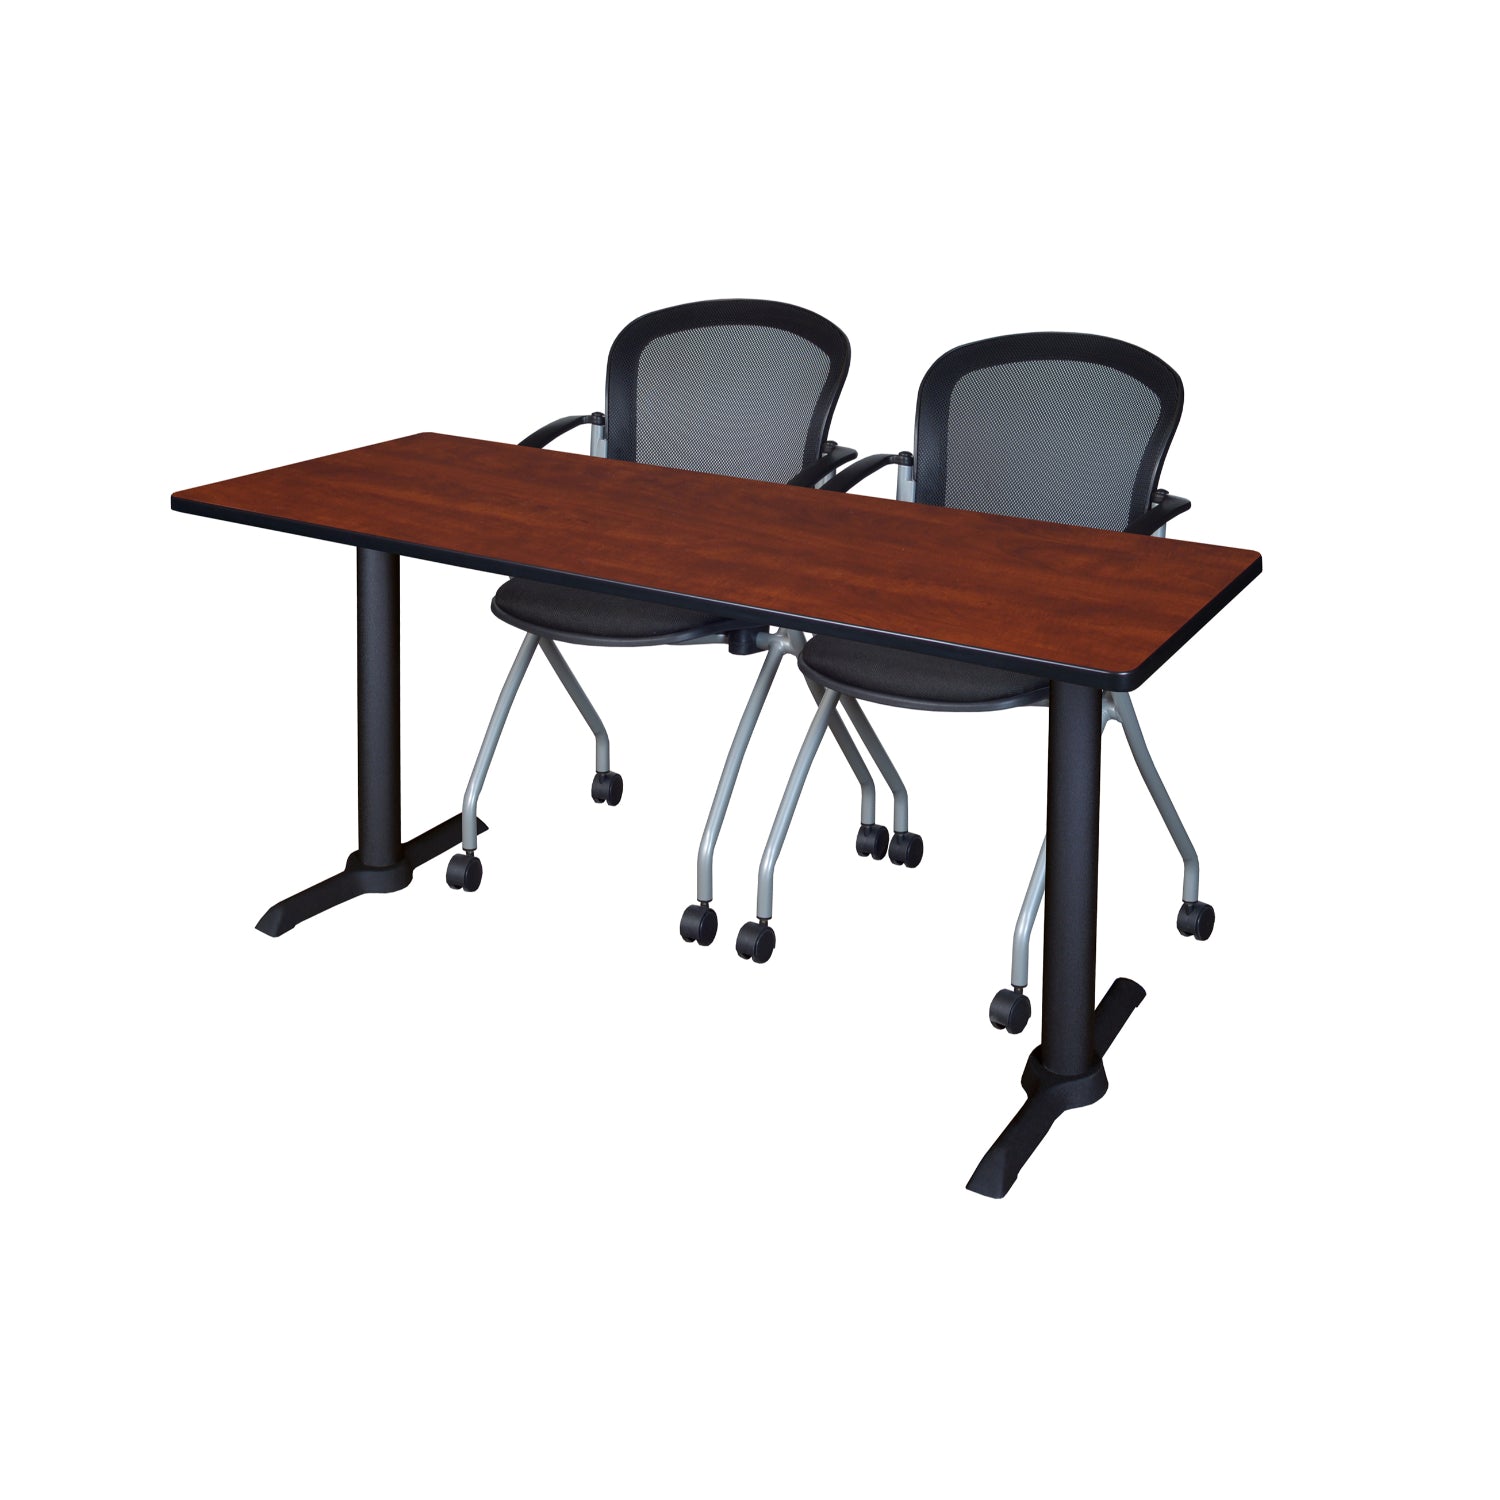 Cain Training Table and Chair Package, Cain 72" x 24" T-Base Training/Seminar Table with 2 Cadence Nesting Chairs